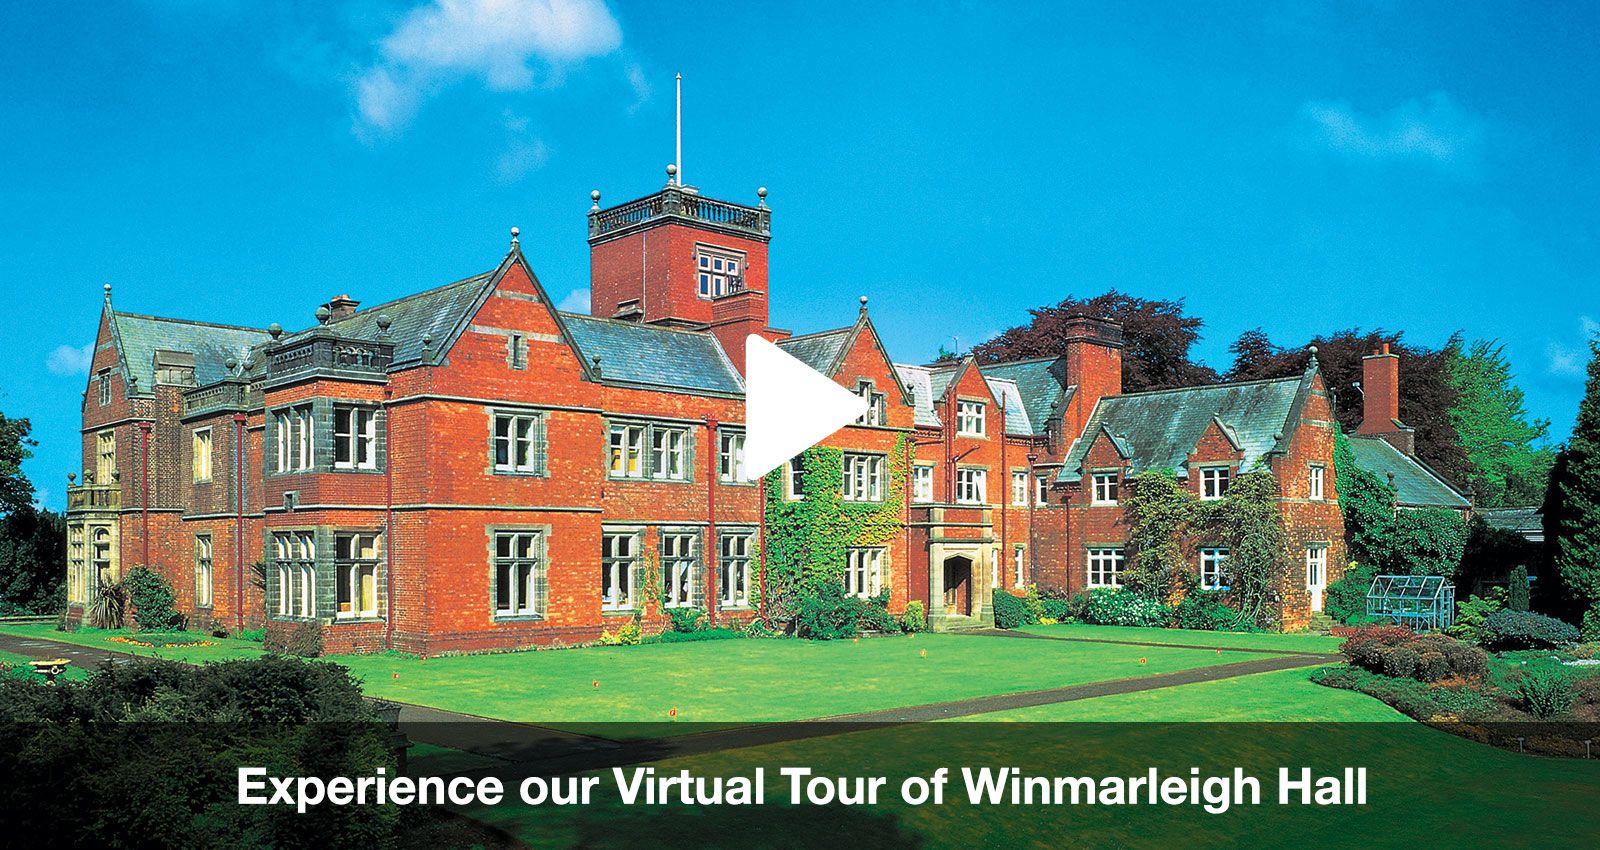 Winmarleigh Hall for International Students